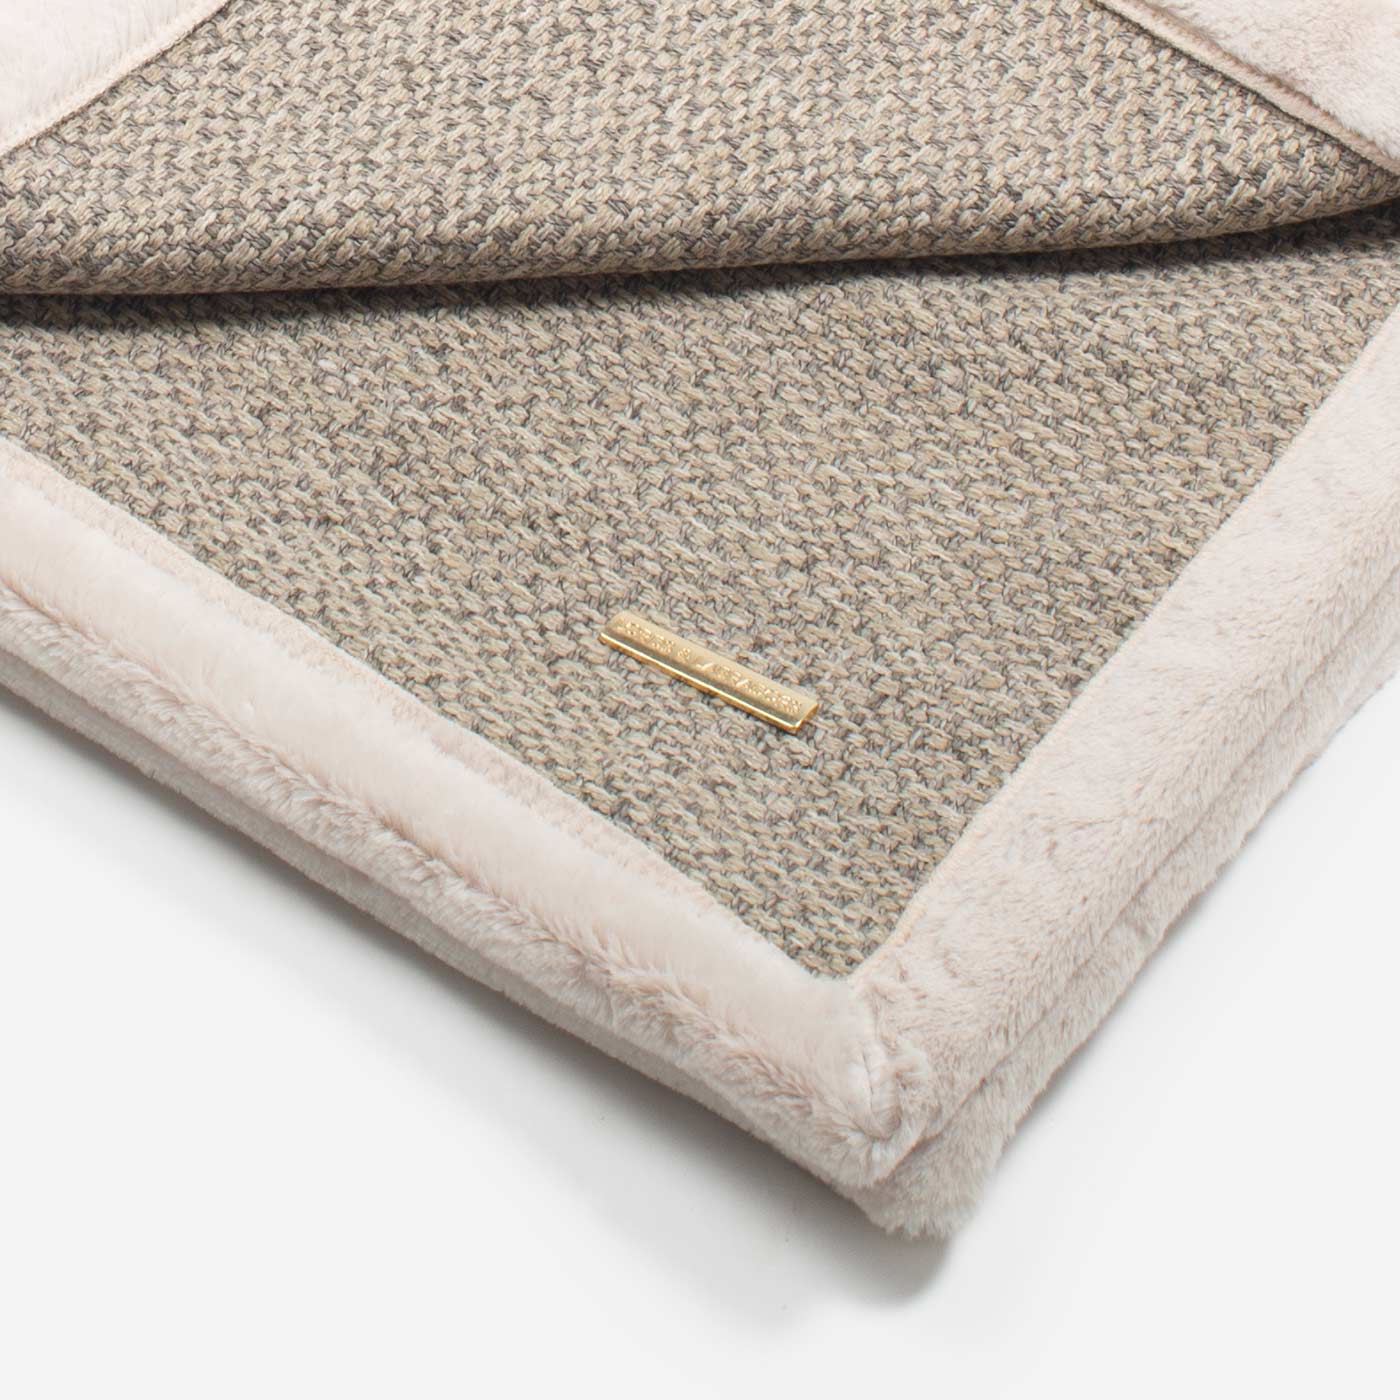 Present your furry friend with our luxuriously thick, plush blanket for your pet. Featuring a reverse side with hardwearing woven fabric handmade in Italy for the perfect high-quality pet blanket! Essentials Herdwick Blanket In Pebble, Available now at Lords & Labradors US